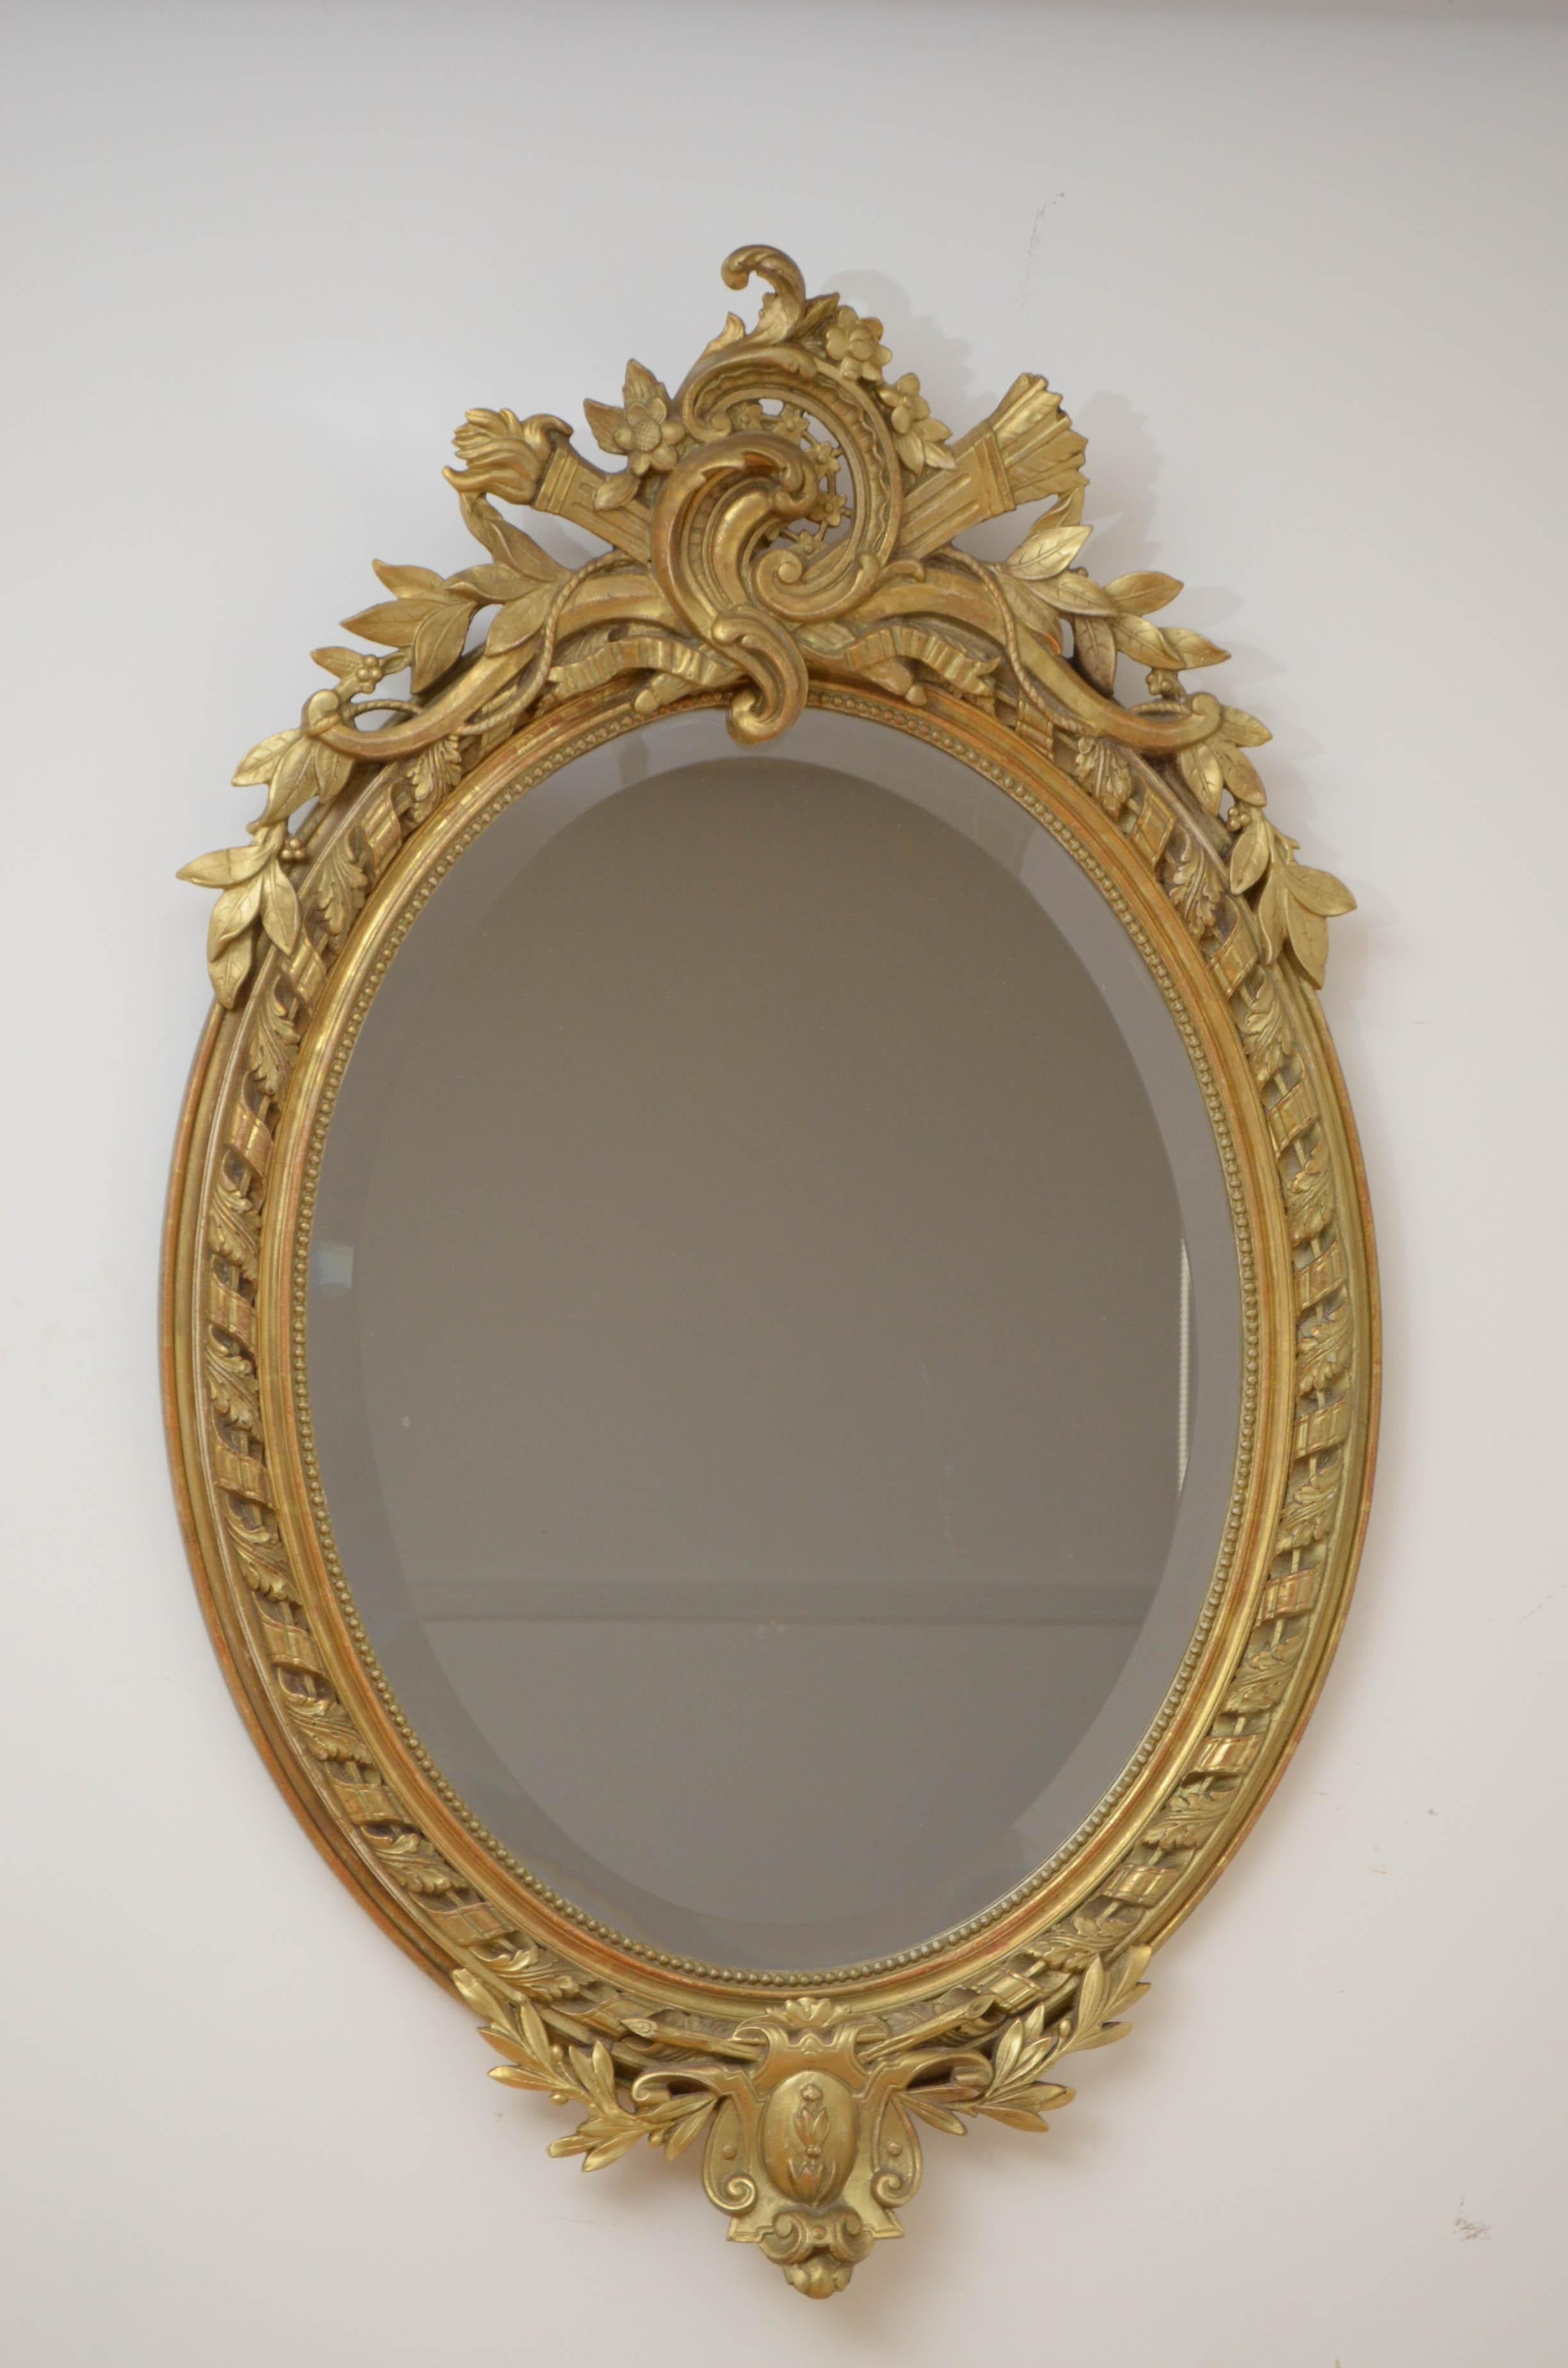 Fine 19th century hand carved mirror in Belle Époque style, having original beveled edge glass with some speckle in finely carved frame. The frame is carved with ‘les pearls’ which symbolizes strand of pearls and leaf motifs throughout. The centre